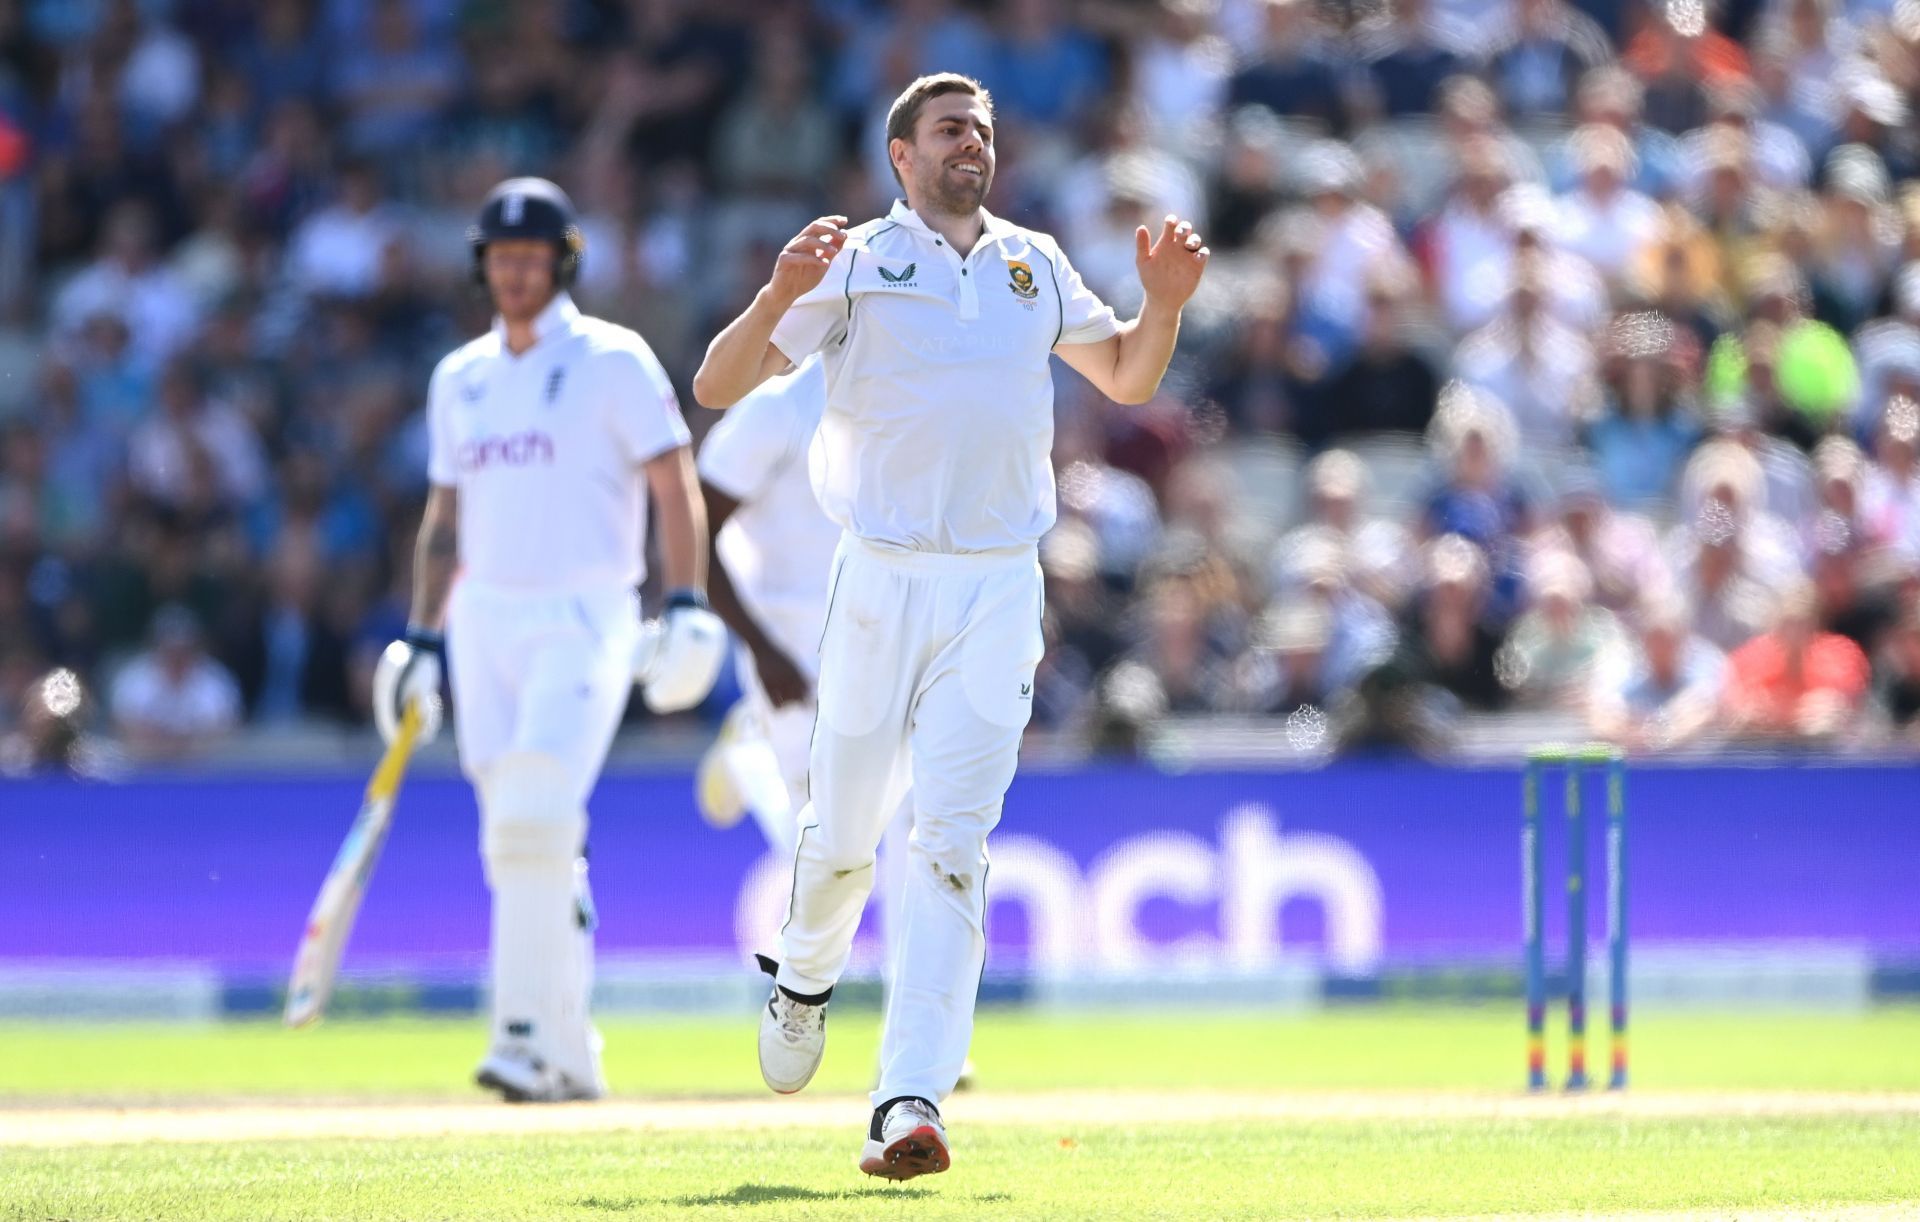 England v South Africa - Second LV= Insurance Test Match: Day Two